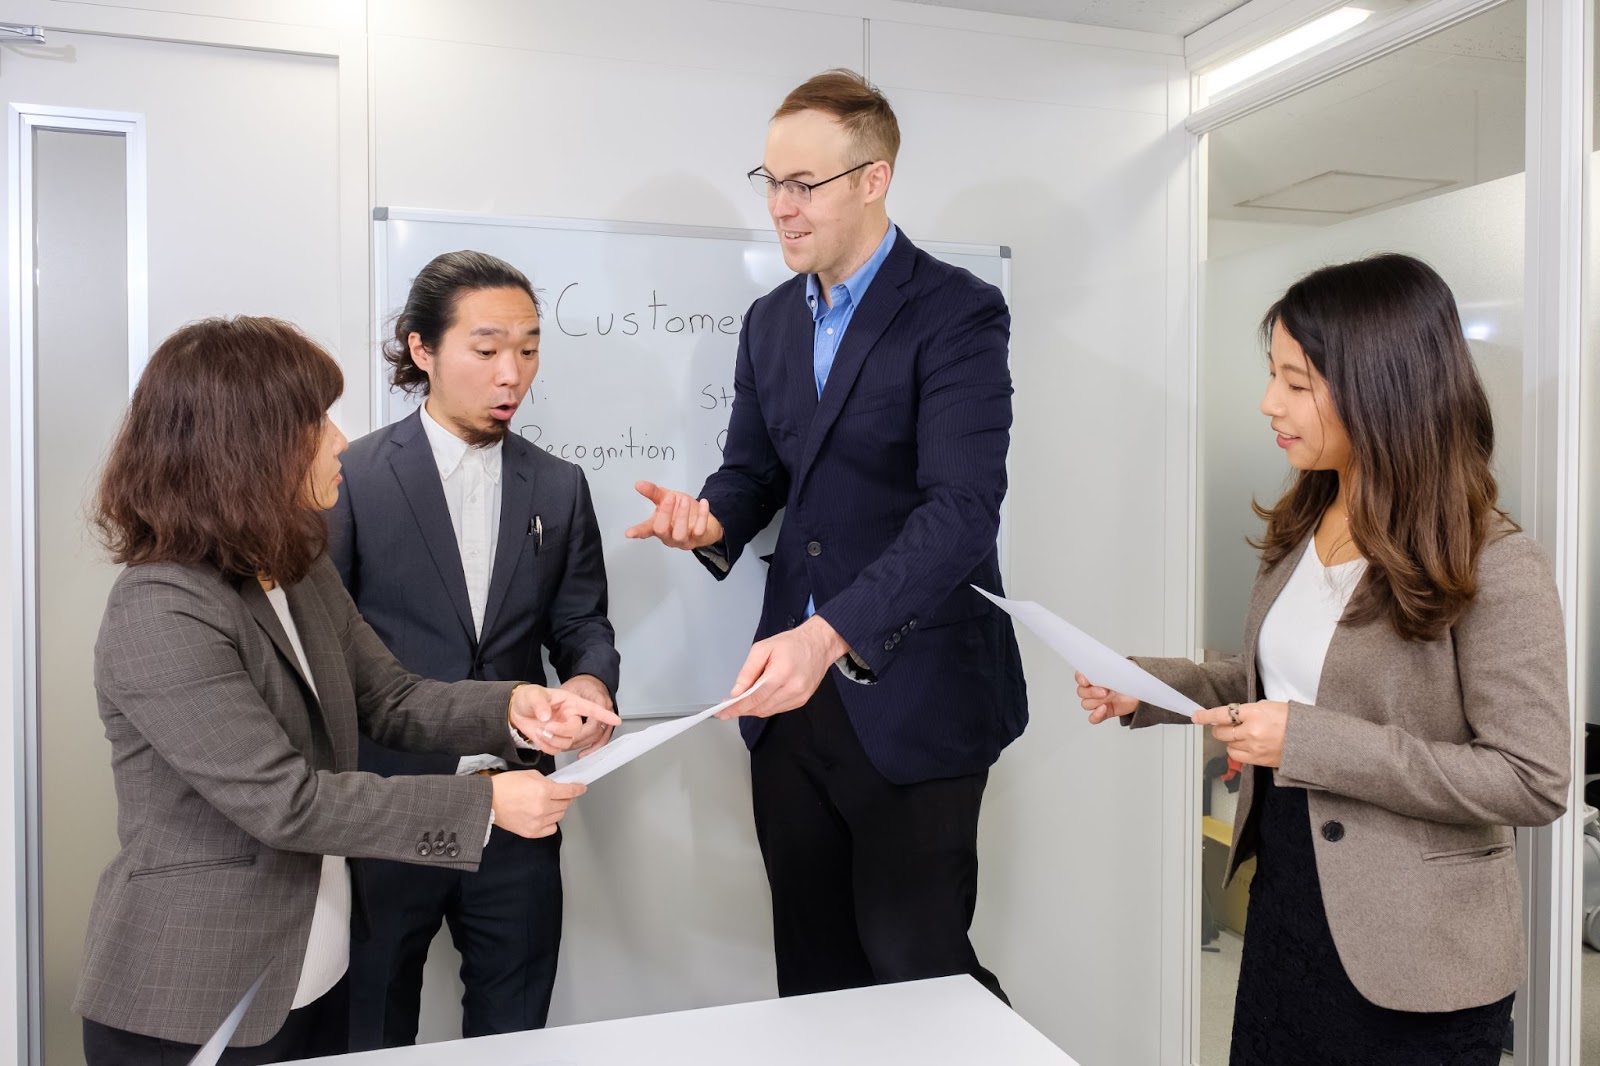 Finding a English Speaking Representative for PR and Digital Marketing in Japan